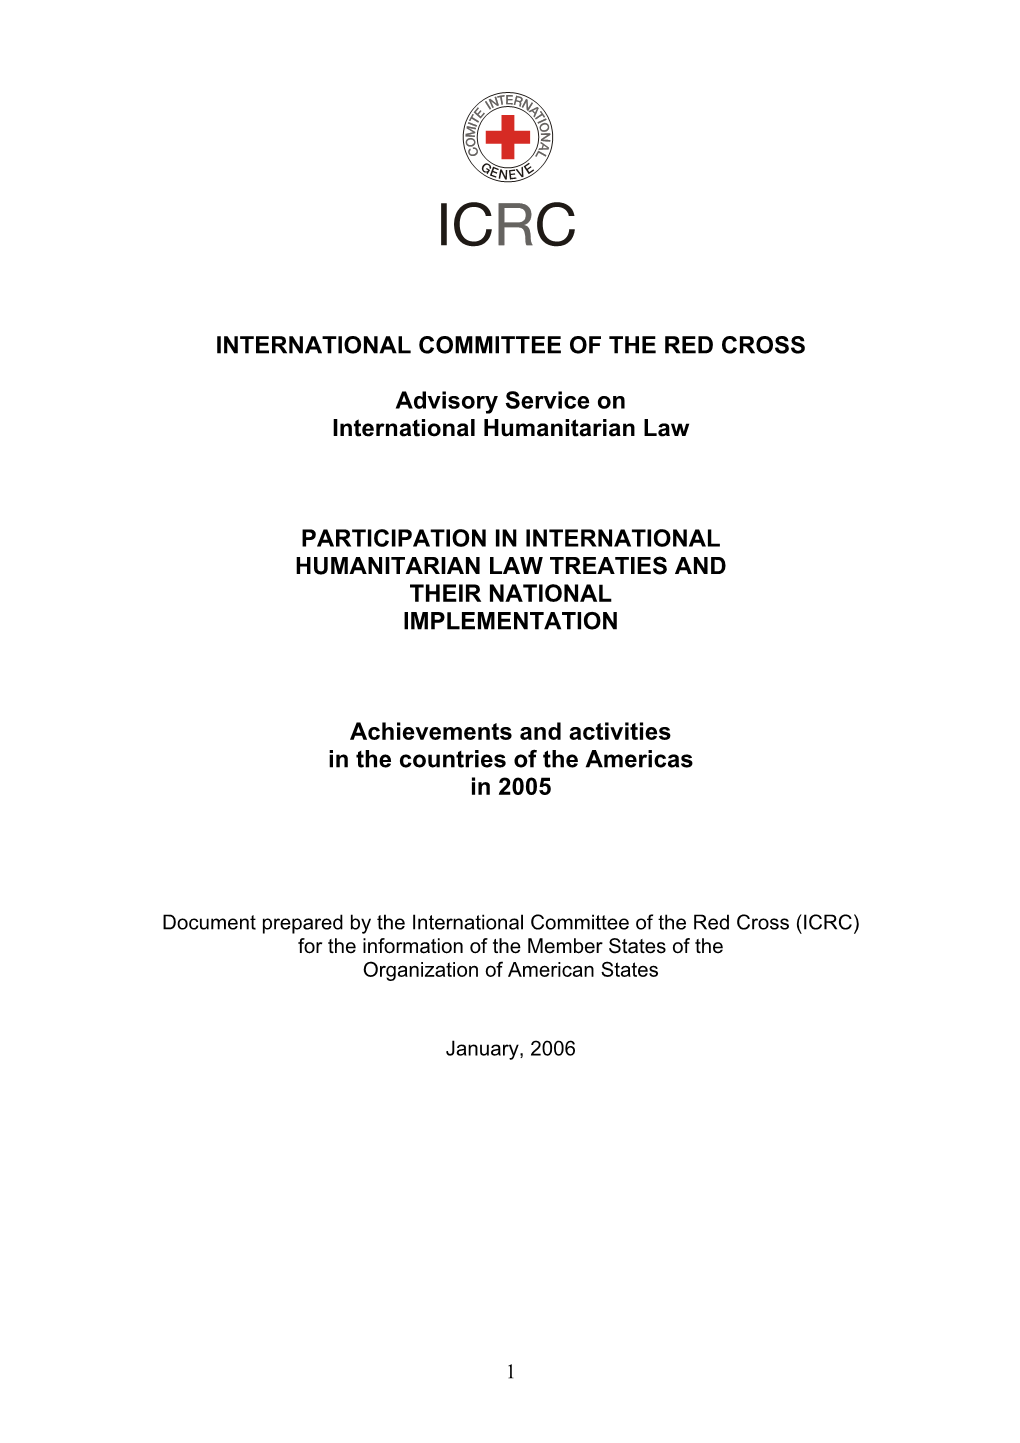 Participation in International Humanitarian Law Treaties and Their National Implementation